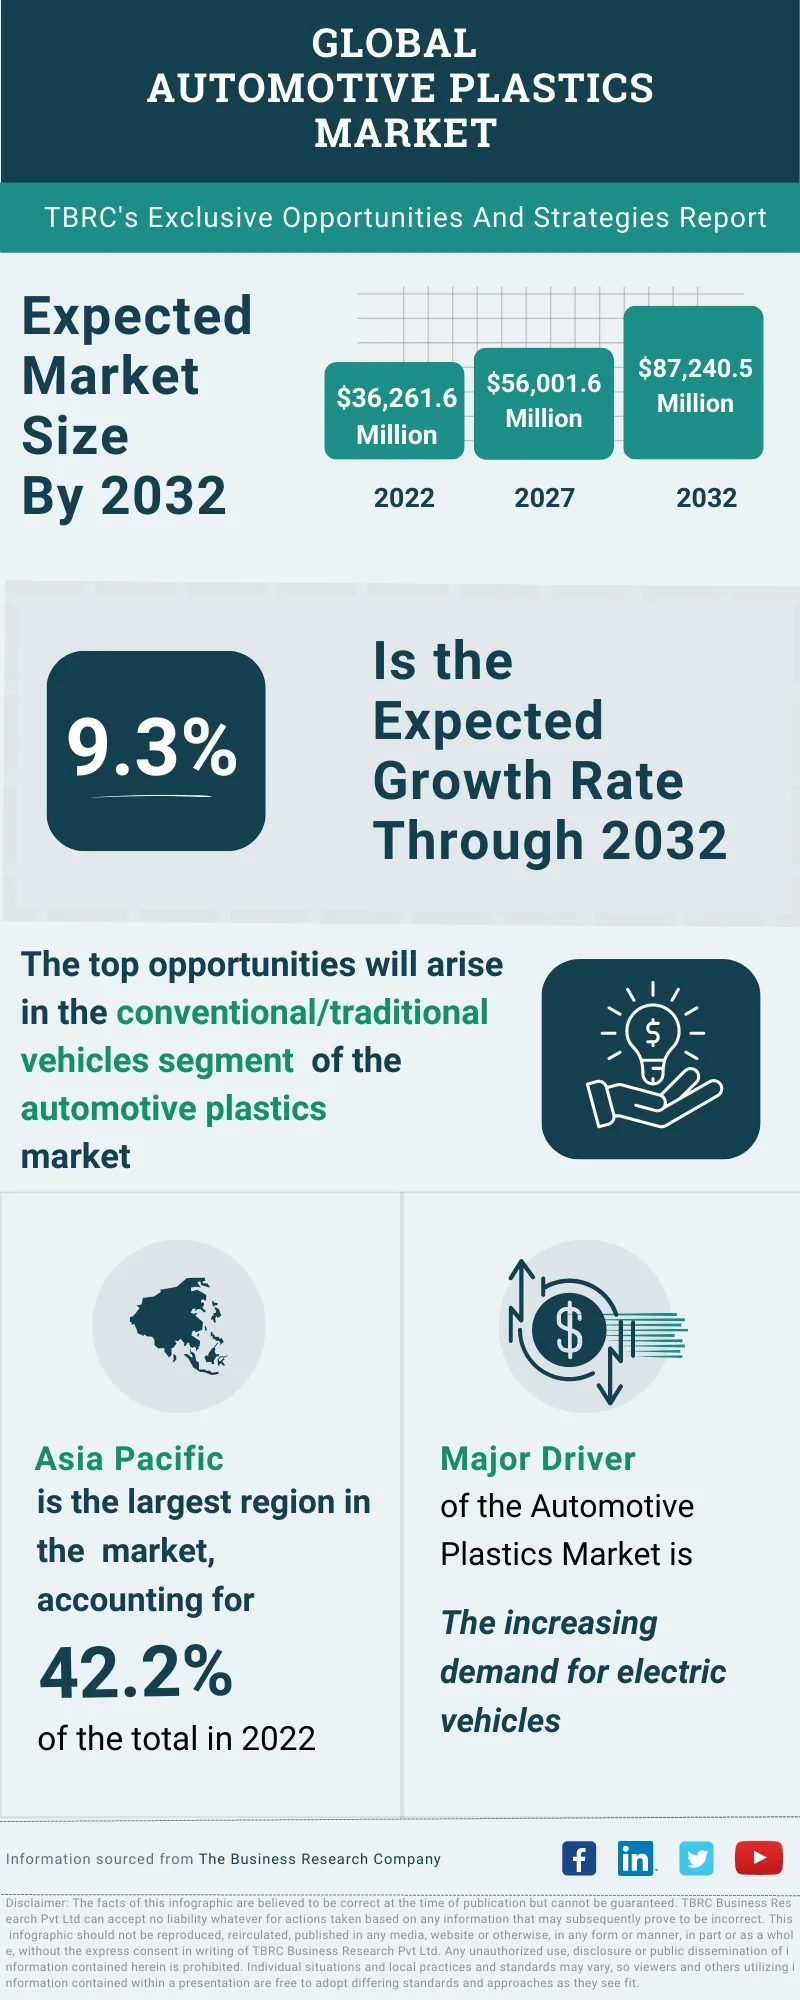 Automotive Plastics Global Market Opportunities And Strategies To 2032